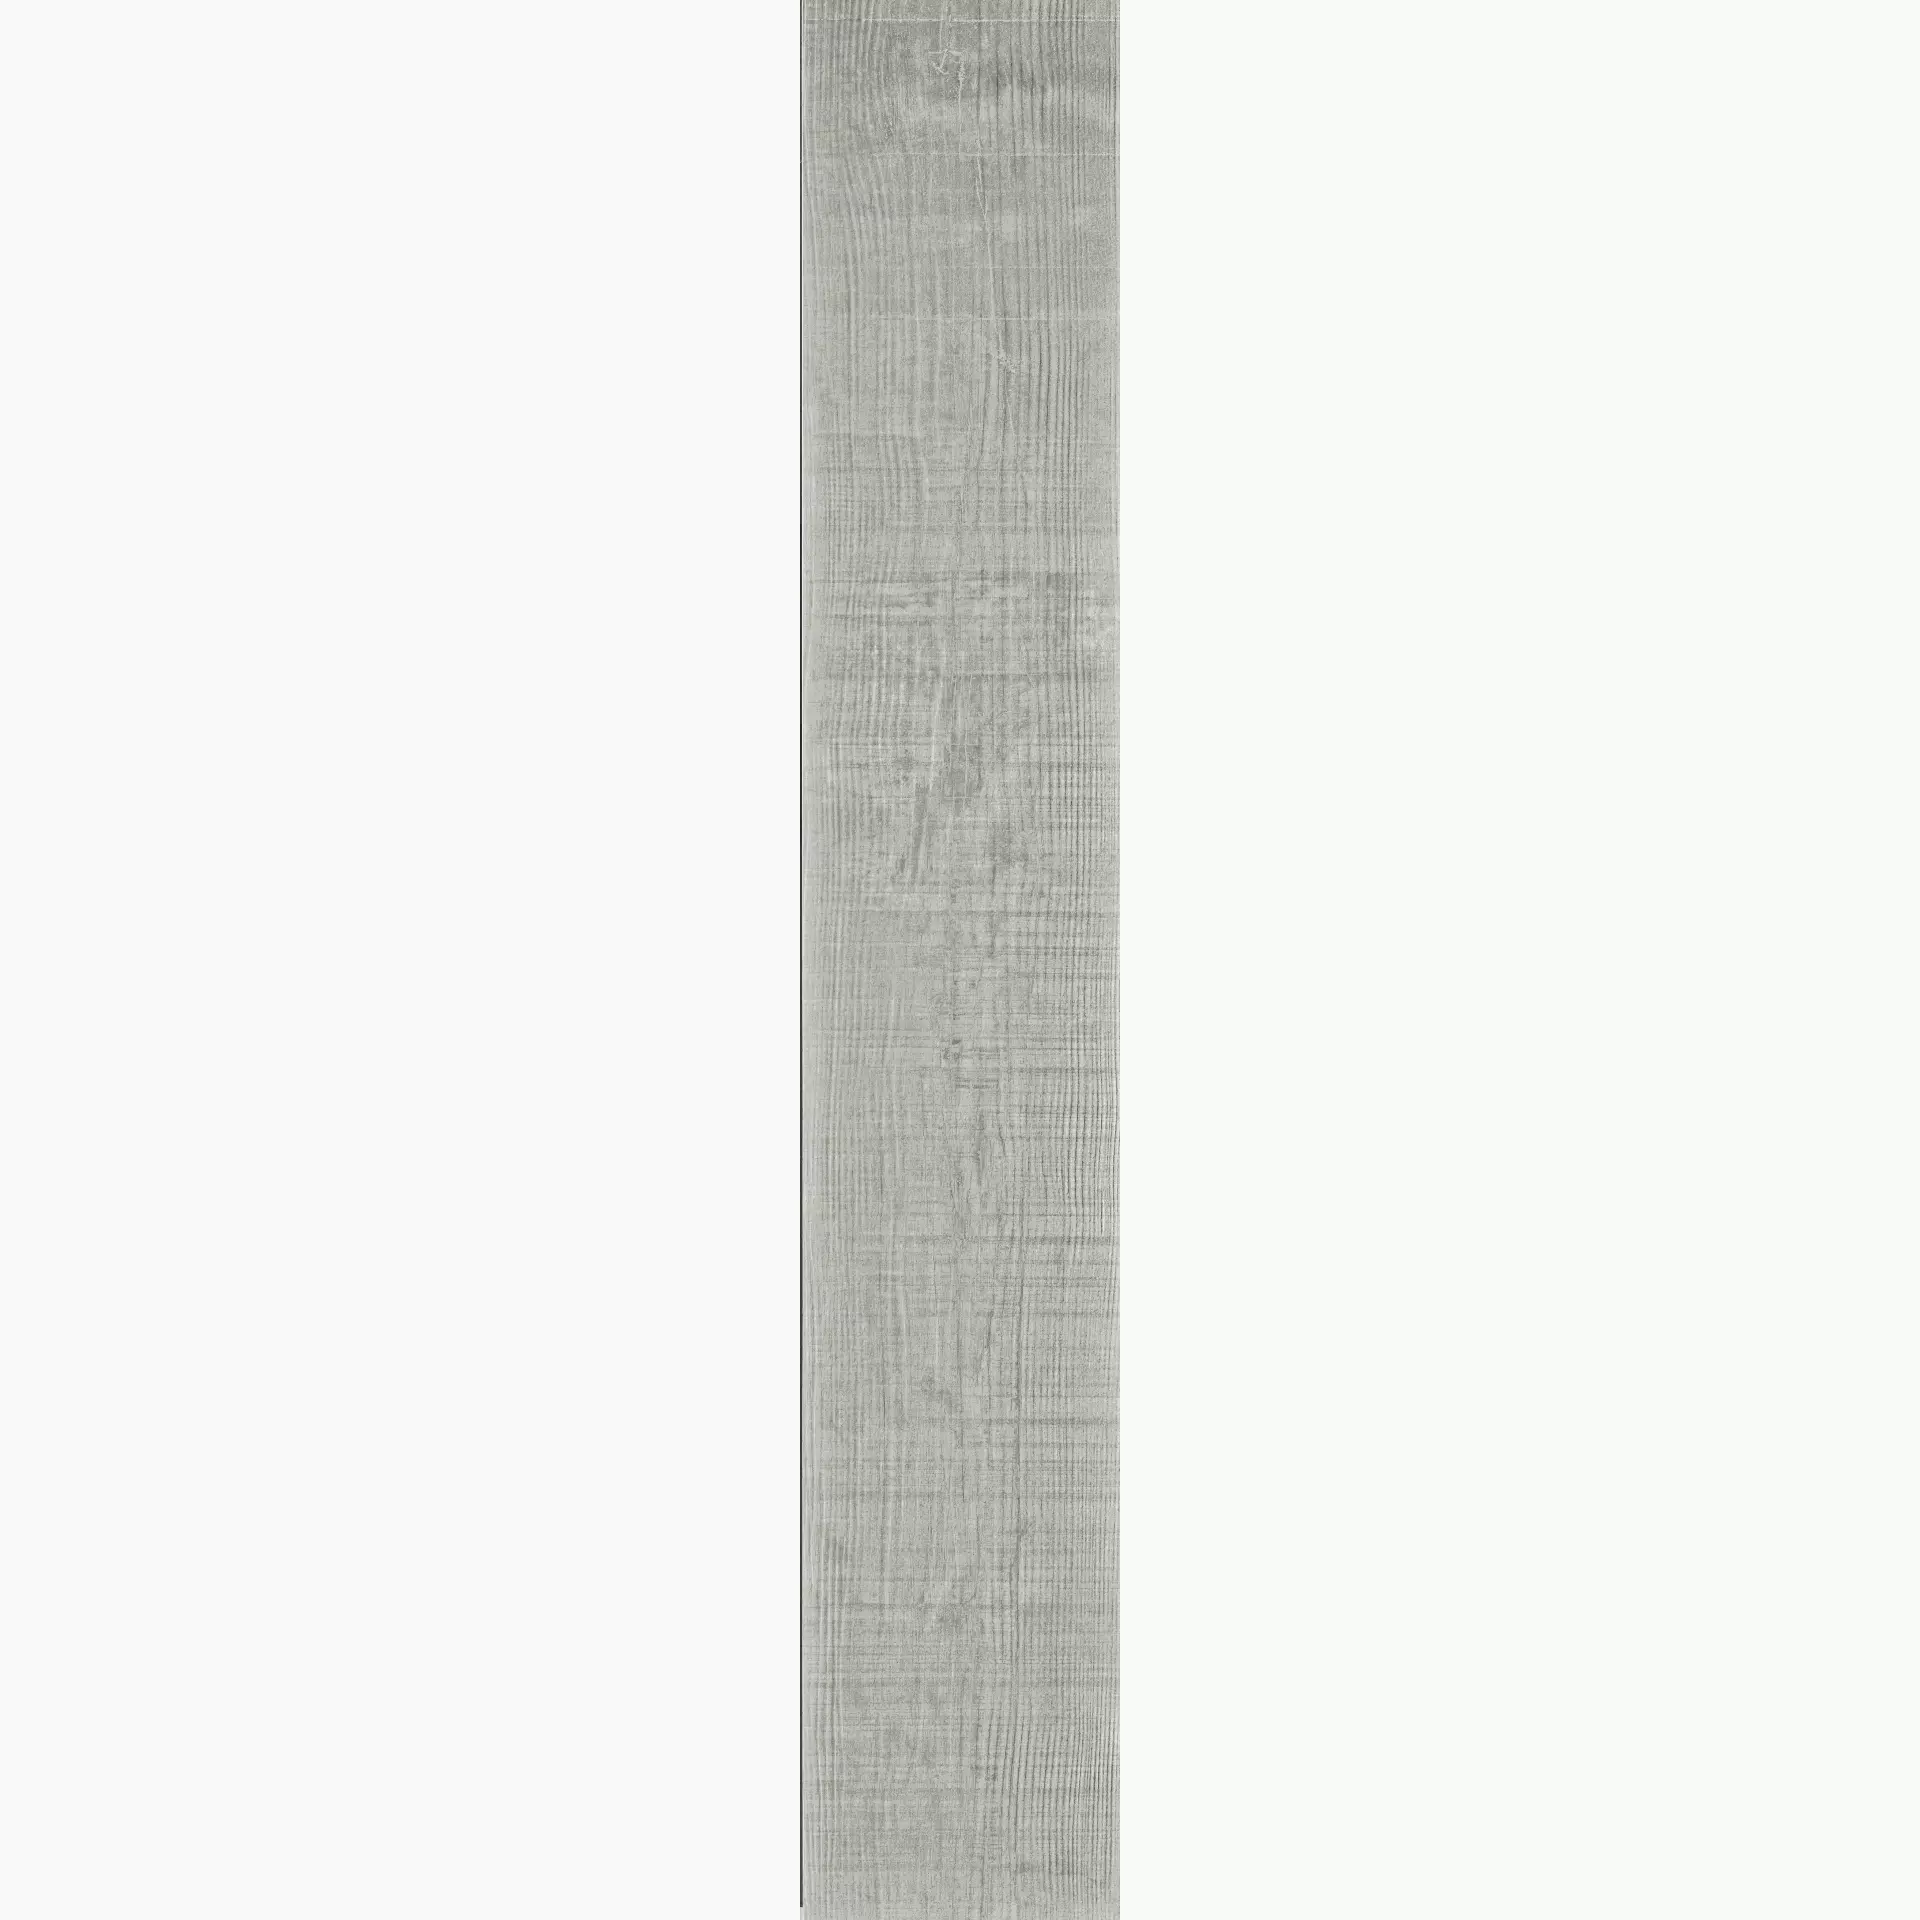 Serenissima Norway Natural Feel Naturale 1050641 20x120cm rectified 9,5mm